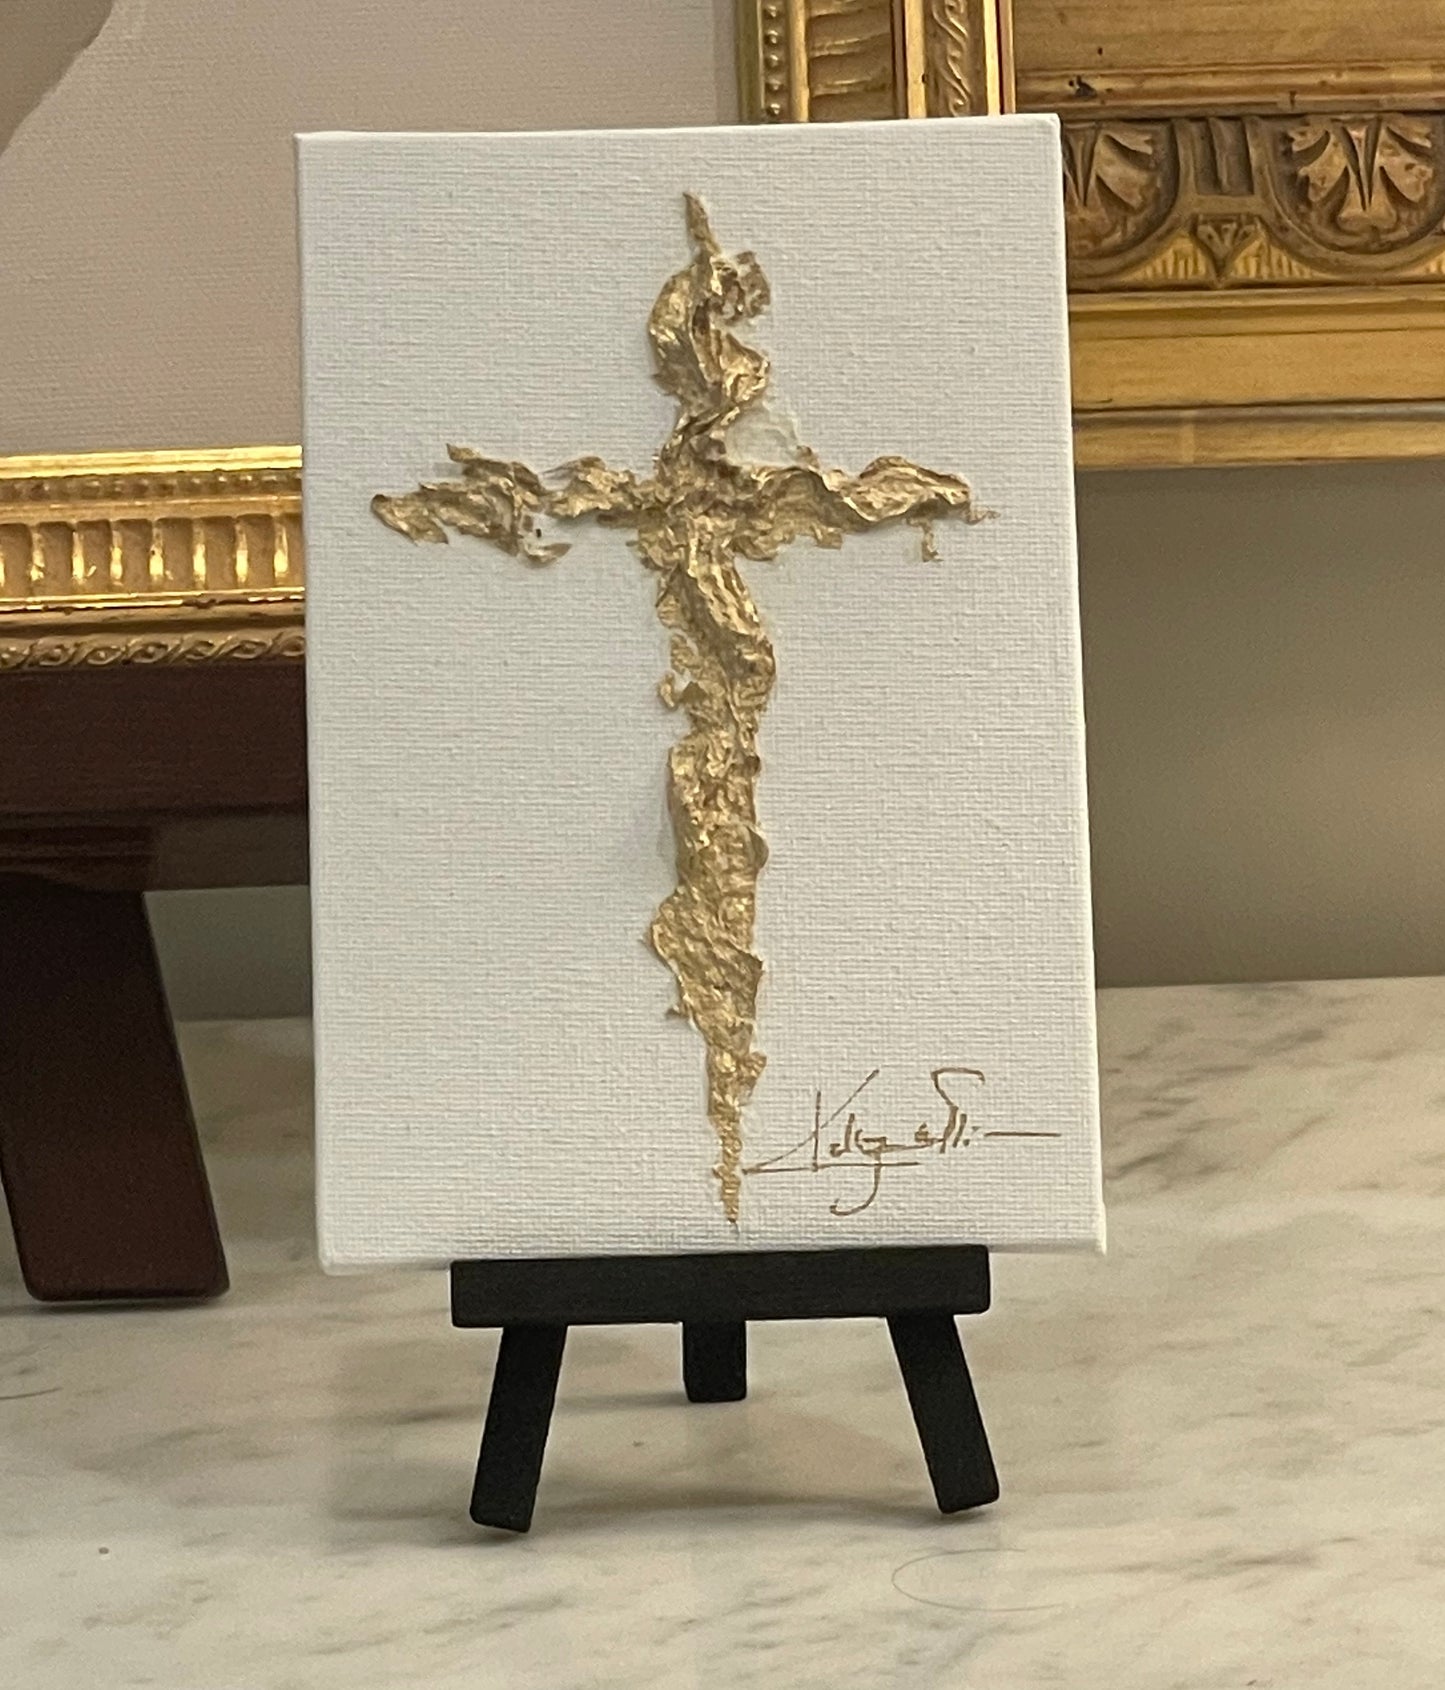 4”x6” Metallic Gold Clay Composite Cross on Canvas Board